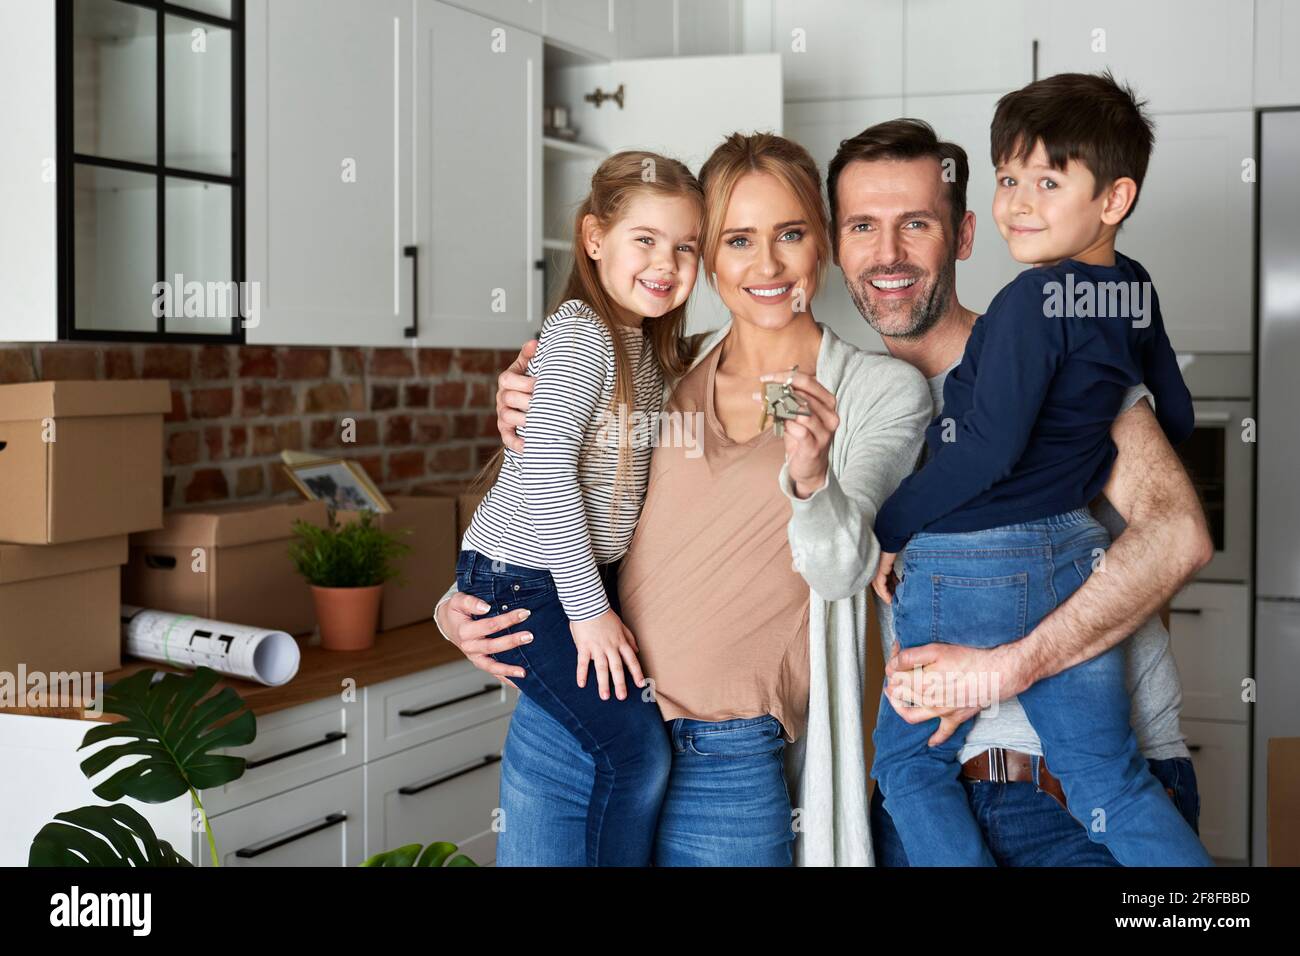 Portrait of family with children holding key for a new apartment Stock Photo